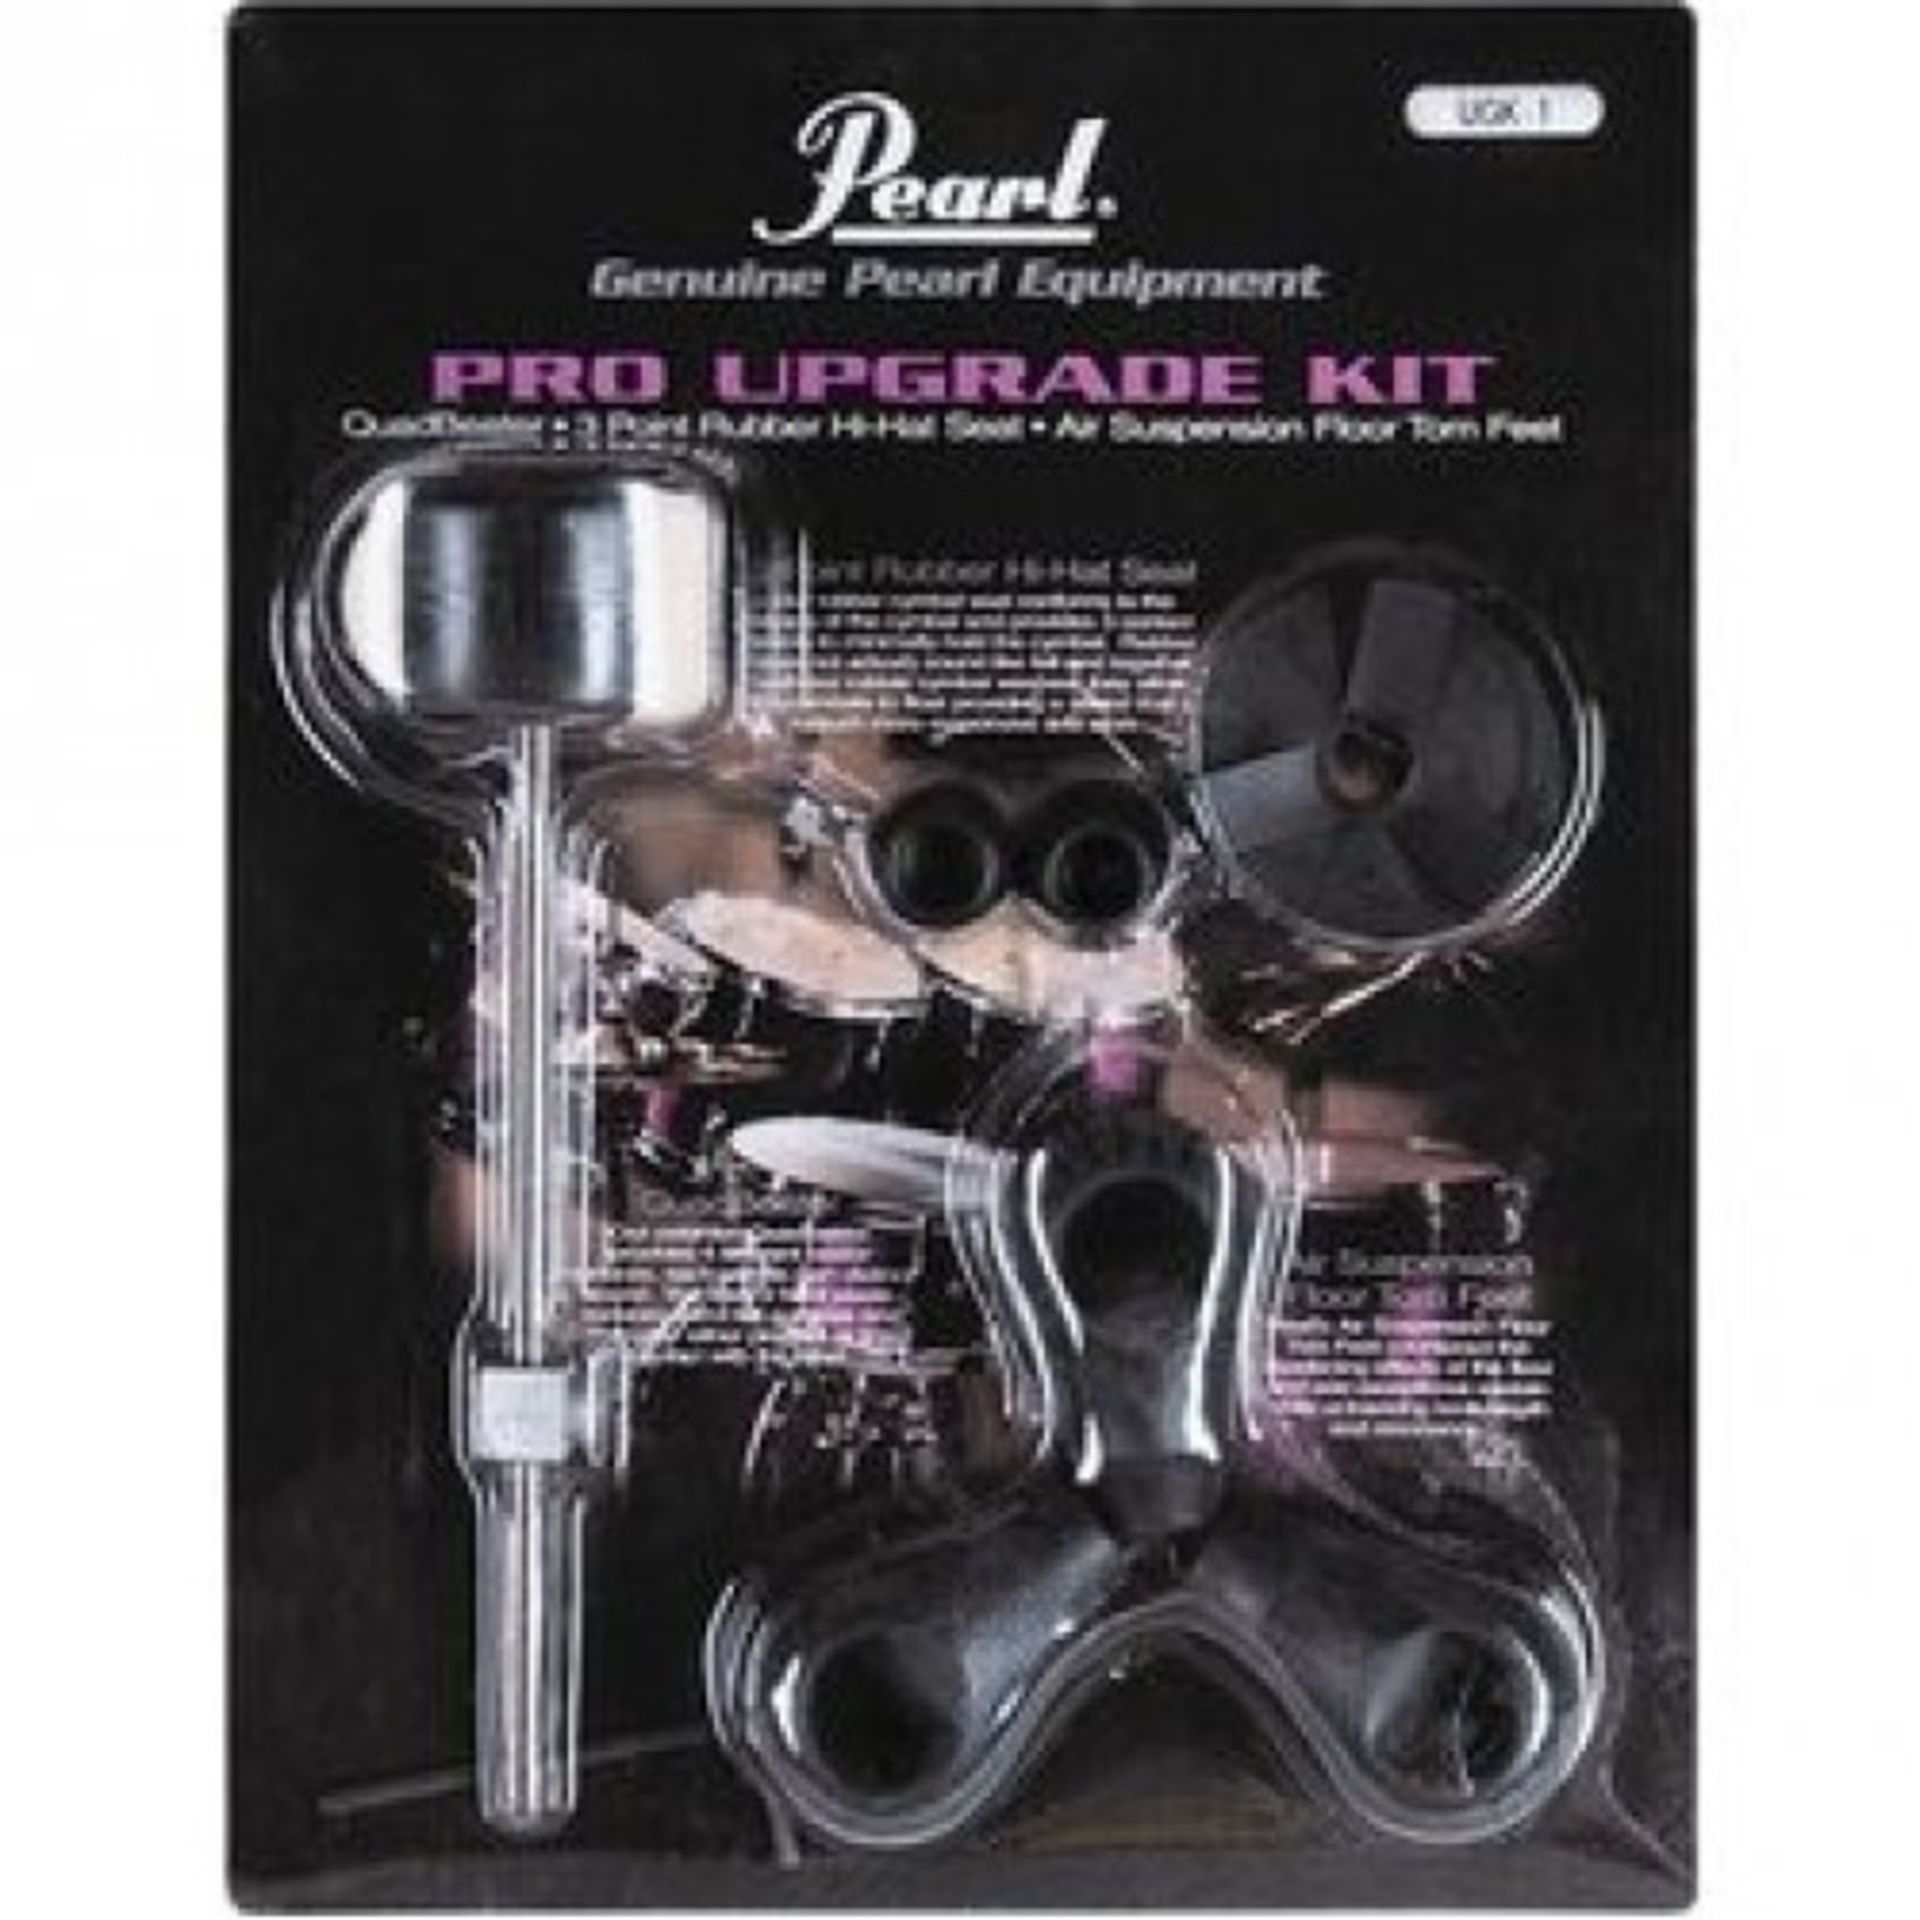 1 x Pearl UGK-1 Drum Upgrade Kit - CL020 - Designed to be a Sound Enhancing Upgrade For ELX/EX and - Bild 8 aus 8